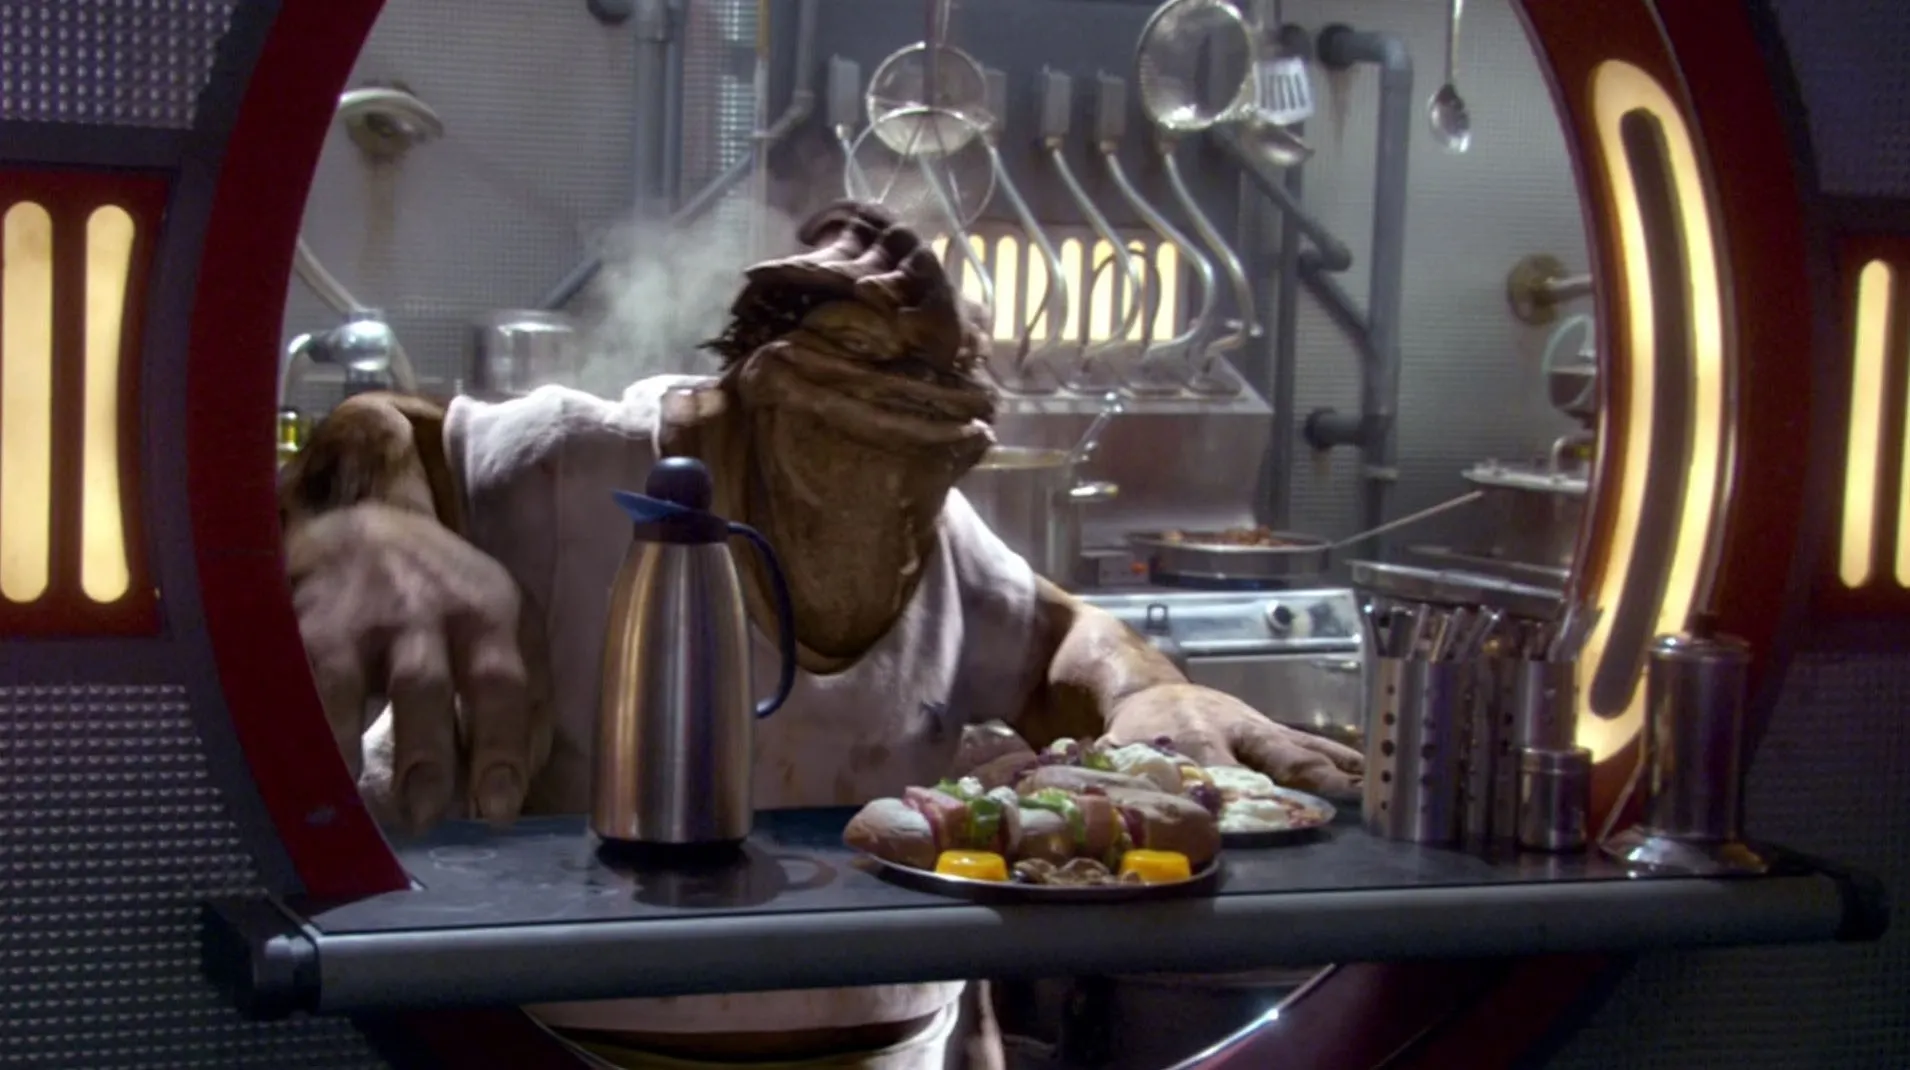 10 Things You Need For Your Dream Star Wars Kitchen